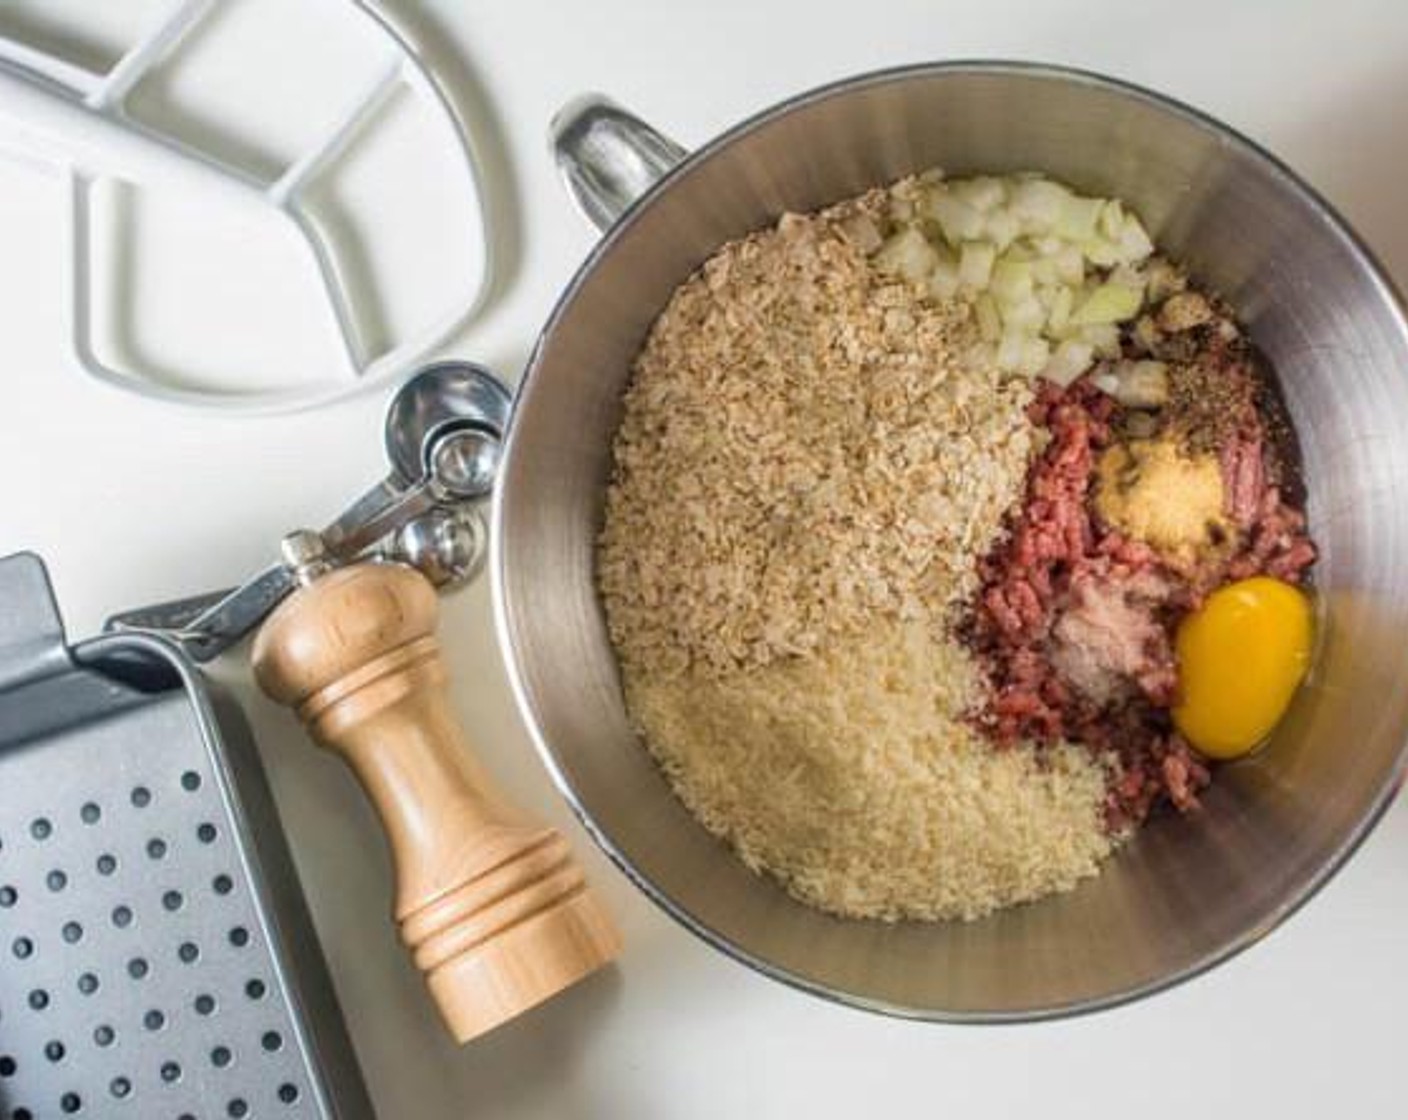 step 2 Combine Ground Beef (1.5 lb), Egg (1), Salt (1 tsp), Freshly Ground Black Pepper (1/2 tsp), McCormick® Garlic Powder (1 tsp), Onion (1/2), Oats (1 cup), and Panko Breadcrumbs (1 cup) in a mixer or by hand.